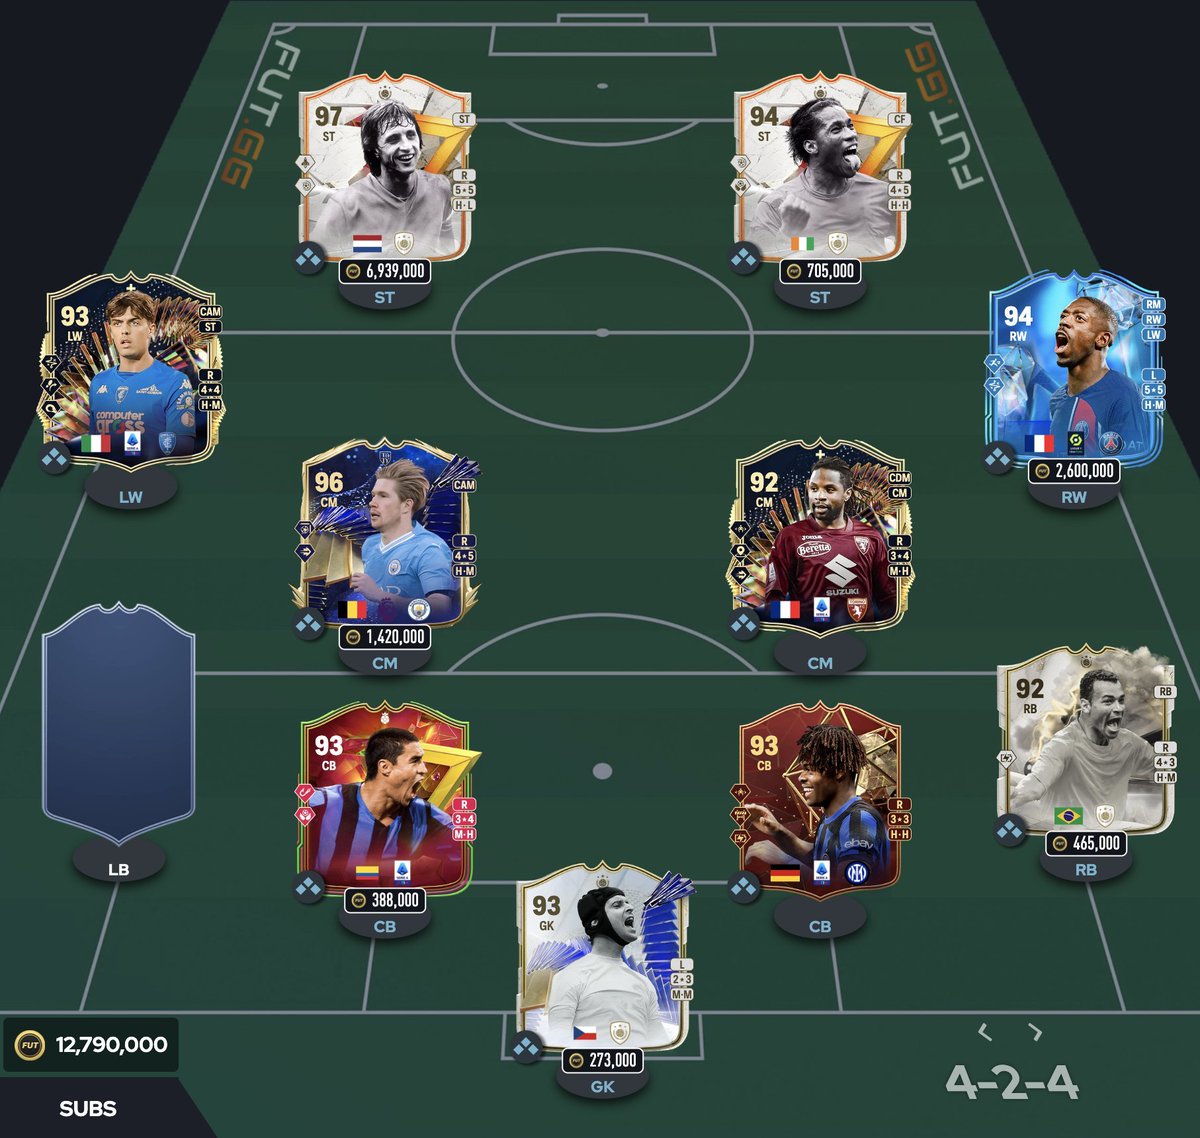 This is my Italy/Serie A P&P RTG right now. Thoughts?

🇨🇿 Cech - Has long spaghetti arms, that's Italian enough for me. 
🇮🇹 Cafu, Bisseck, Cordoba, Maldini, Tameze speak for themselves.
🇧🇪 KDB - Probably the hardest name to pronounce for Italians 
🇨🇮 Drogba - Flip the flag and…